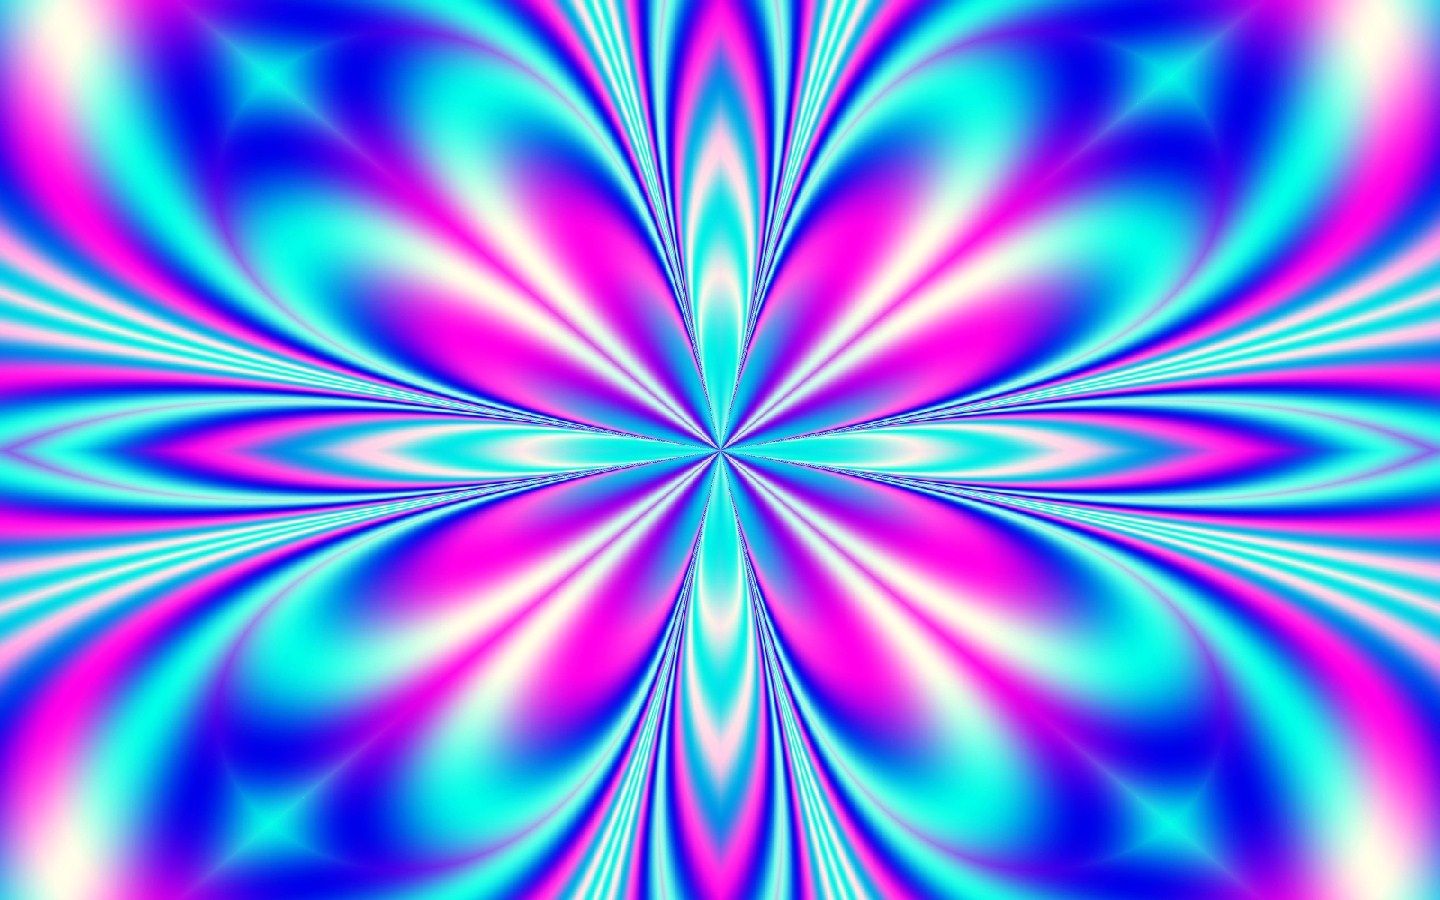 Neon Colors Backgrounds - Neon Bright Color Background - 1440x900 Wallpaper  